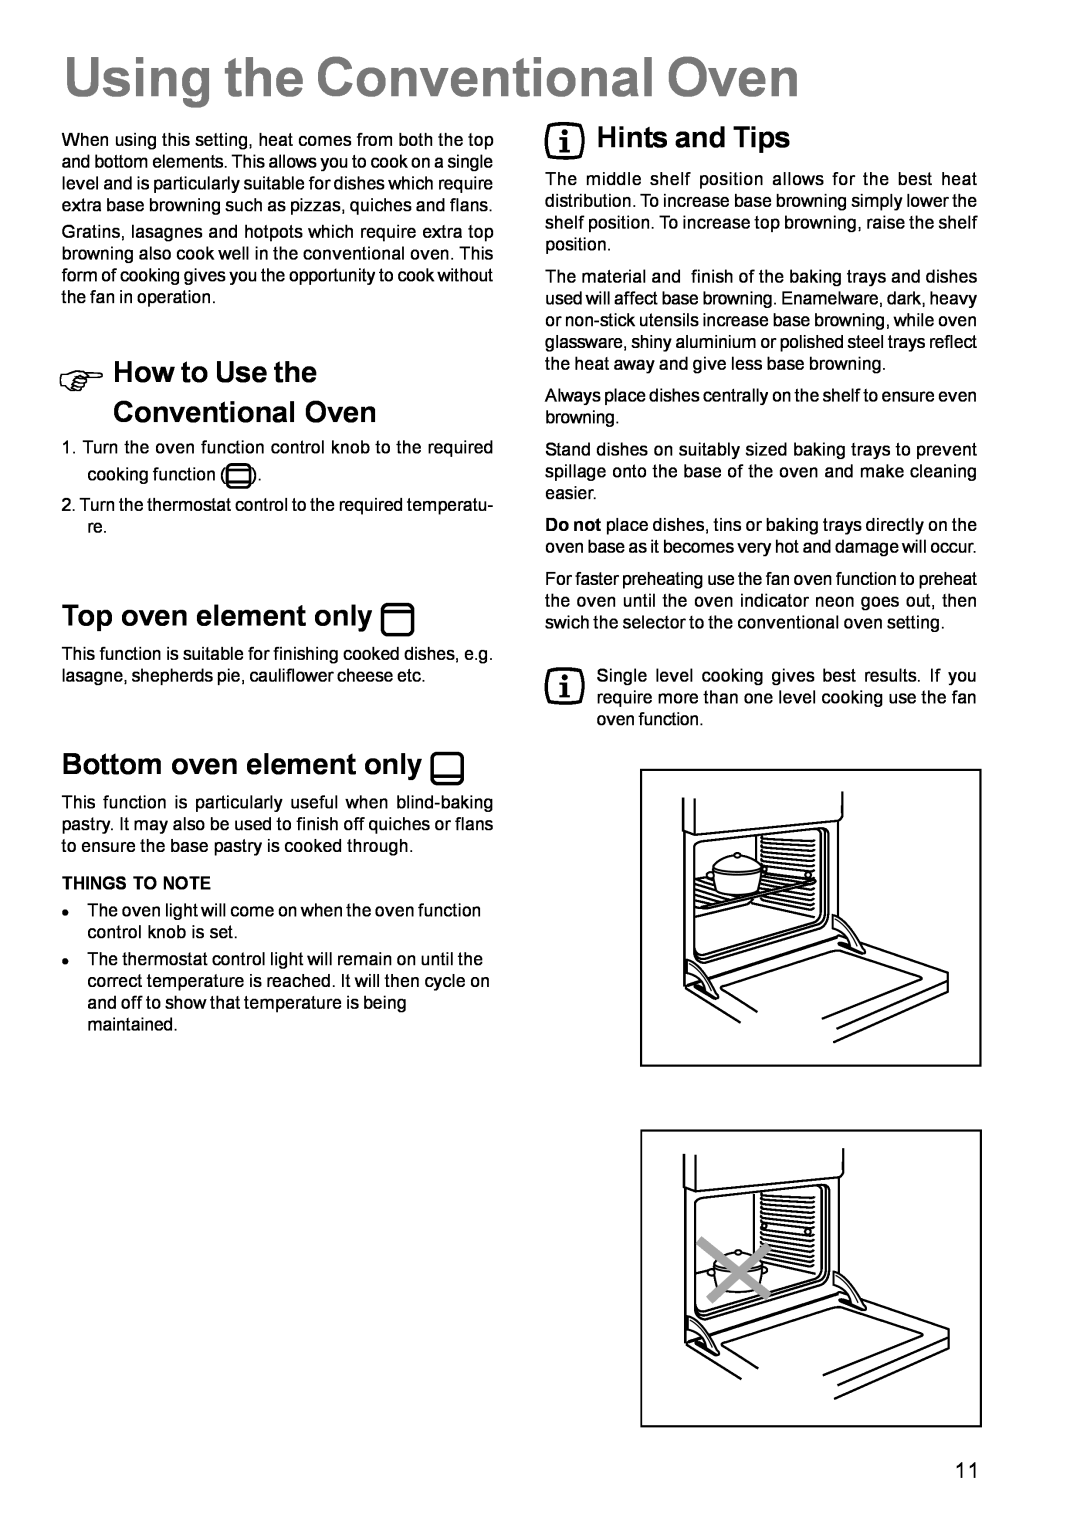 Zanussi ZCE 630 Using the Conventional Oven, Φ How to Use the Conventional Oven, Top oven element only, Hints and Tips 